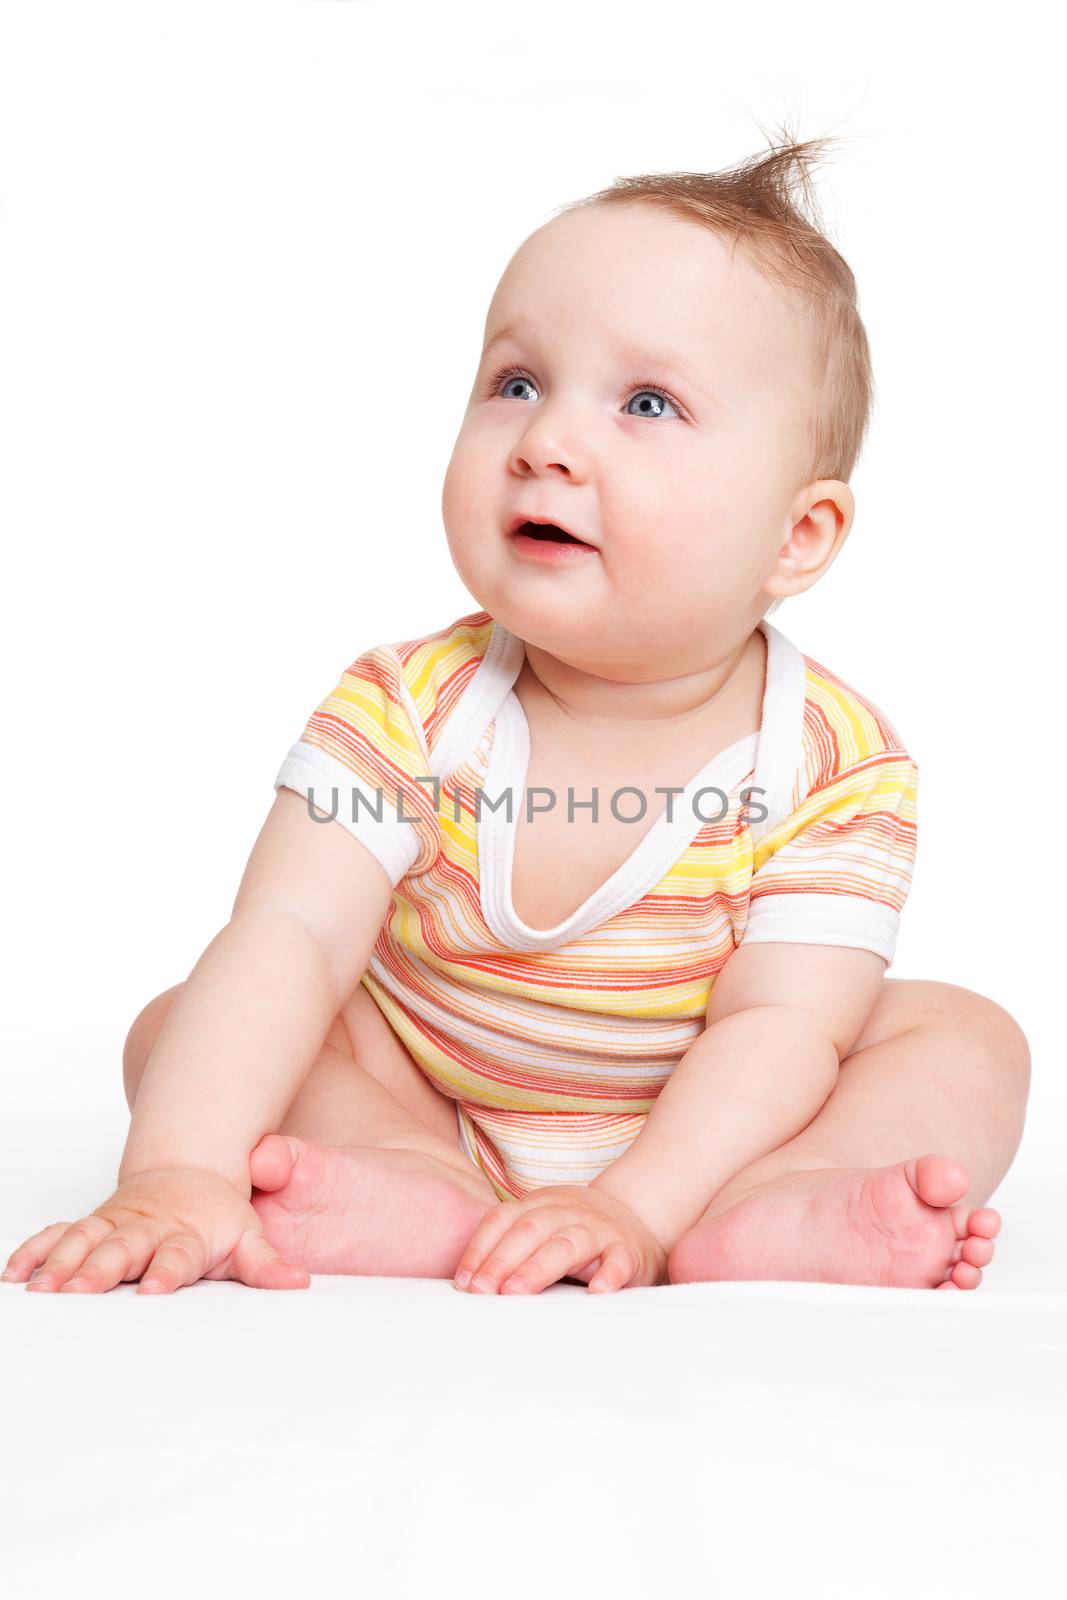 Cute baby girl sitting and looking up isolated on white background. Happy family concept.